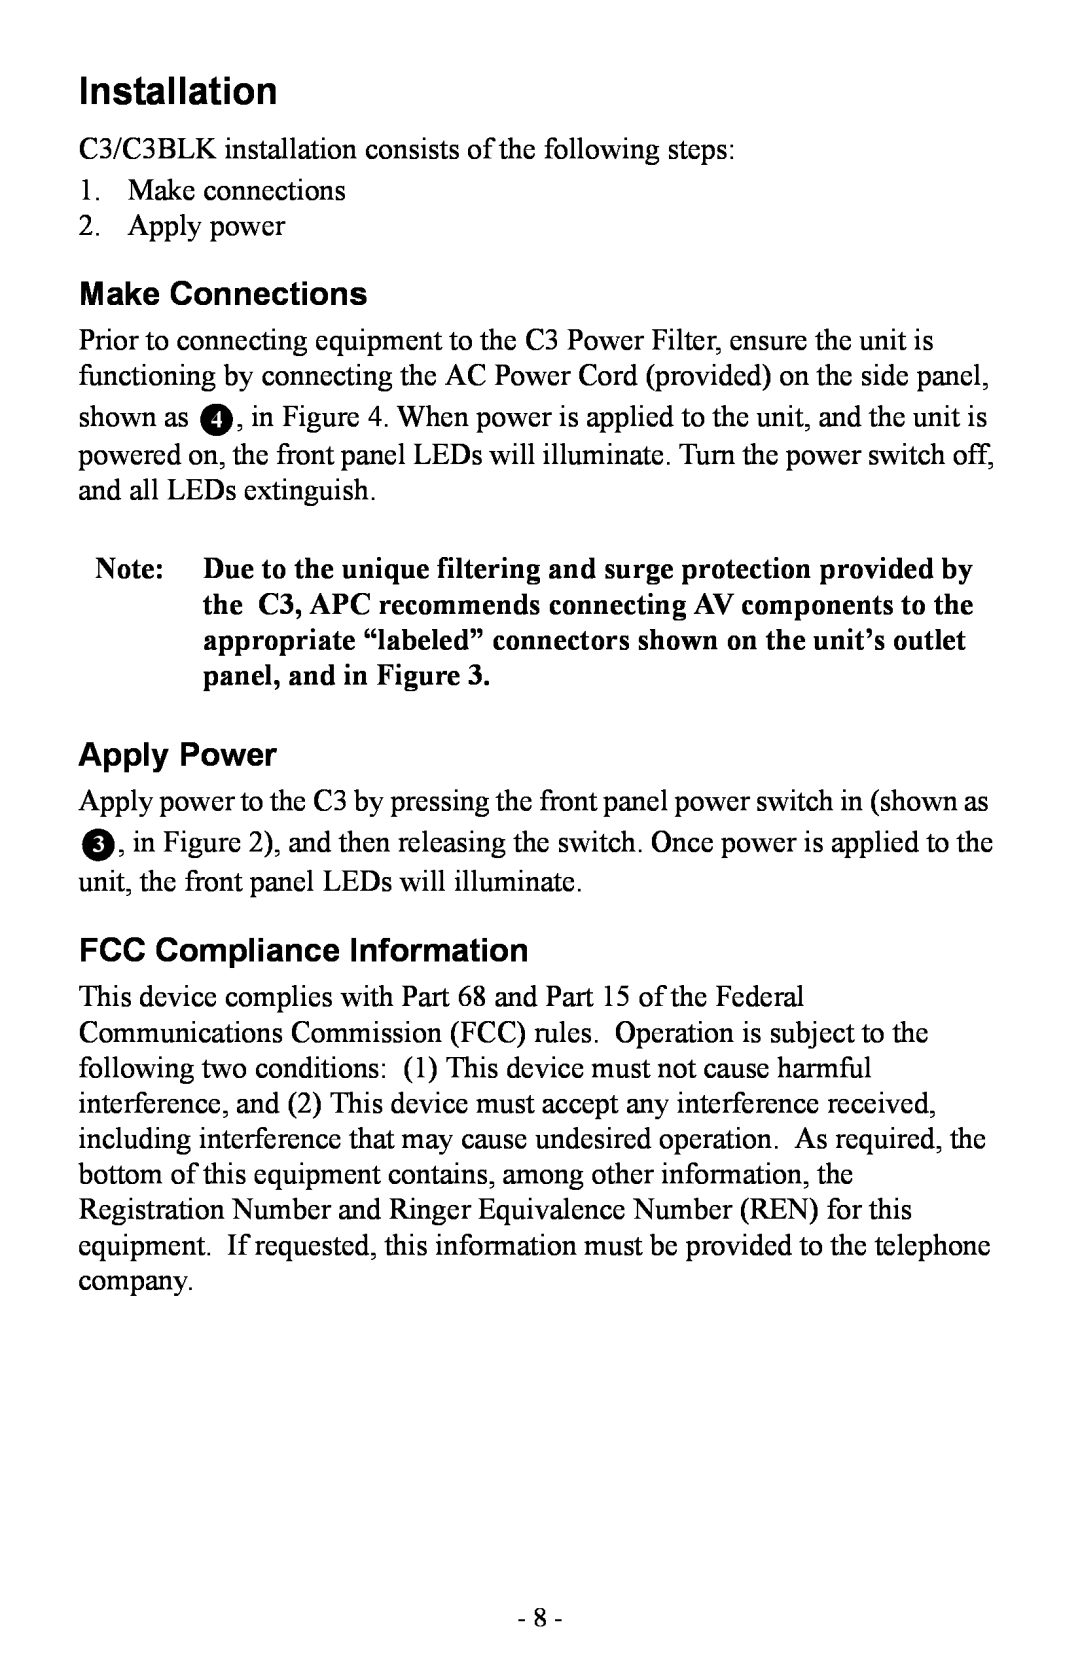 APC Model C3 and C3BLK user manual Installation, Make Connections, Apply Power, FCC Compliance Information 